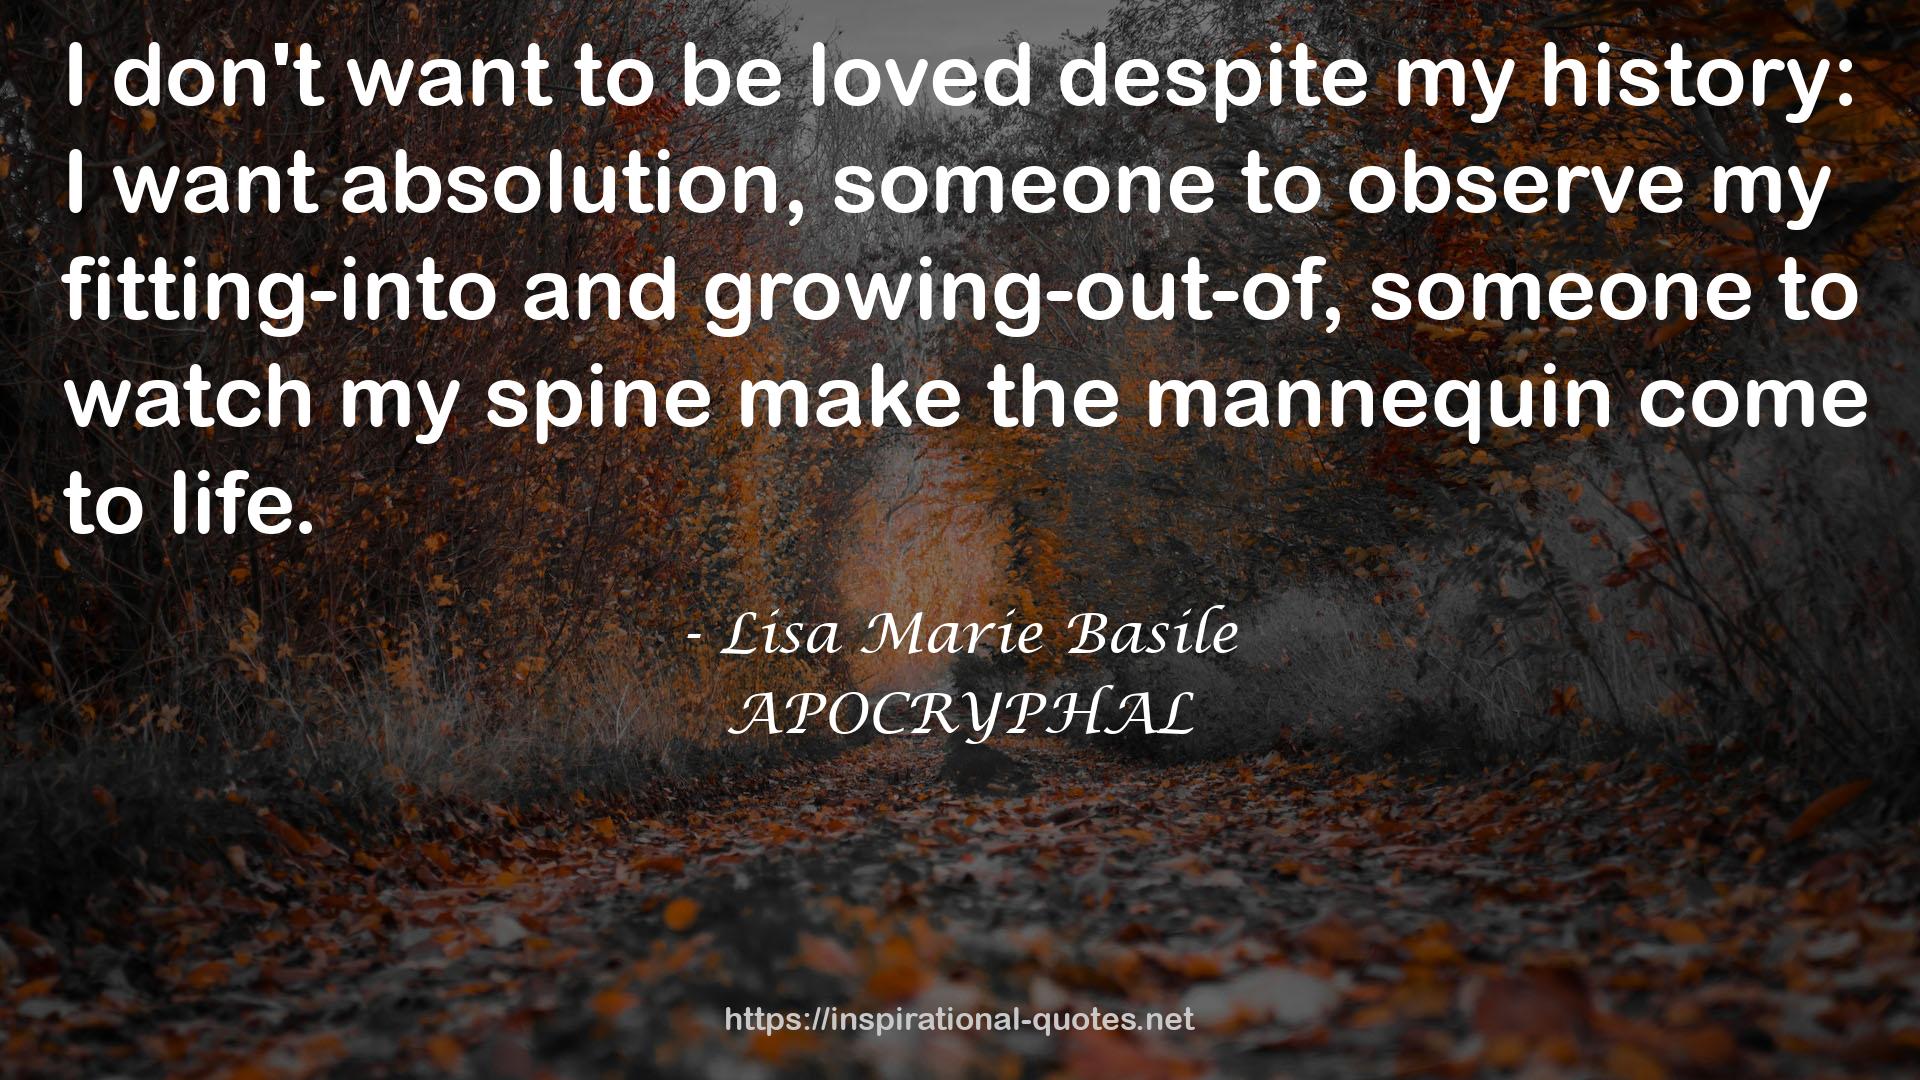 Lisa Marie Basile QUOTES